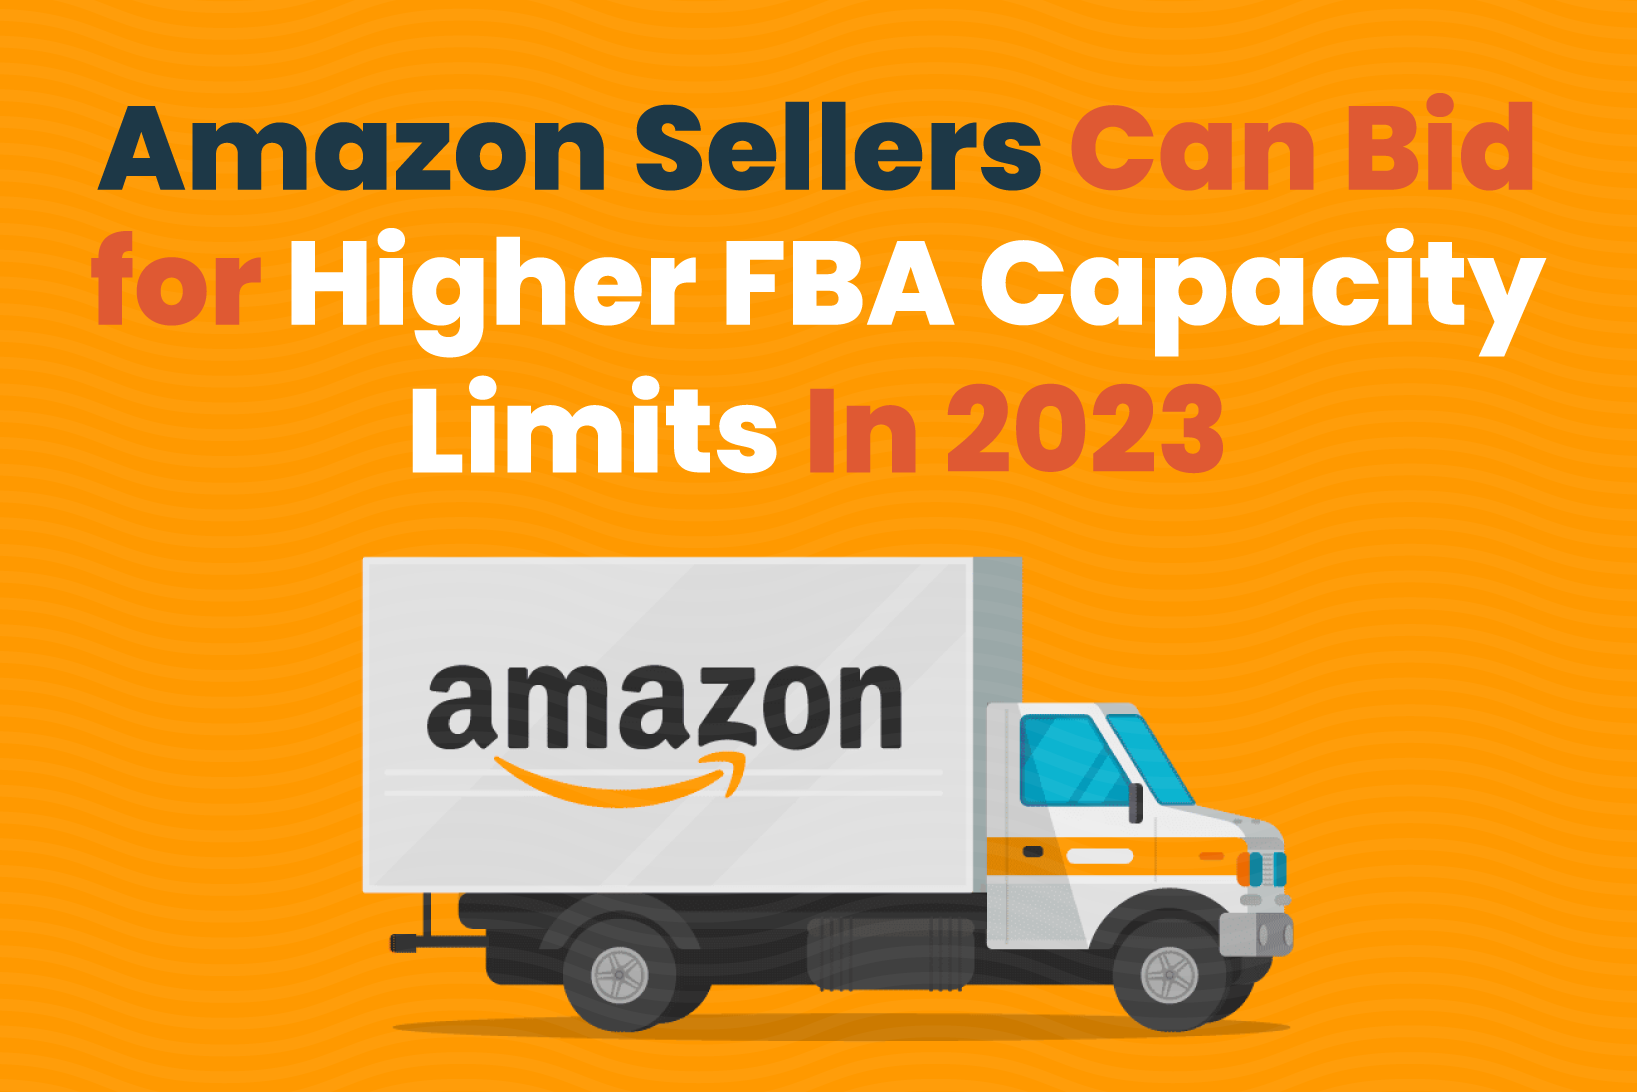 Amazon Sellers Can Bid for Higher FBA Capacity Limits In 2023